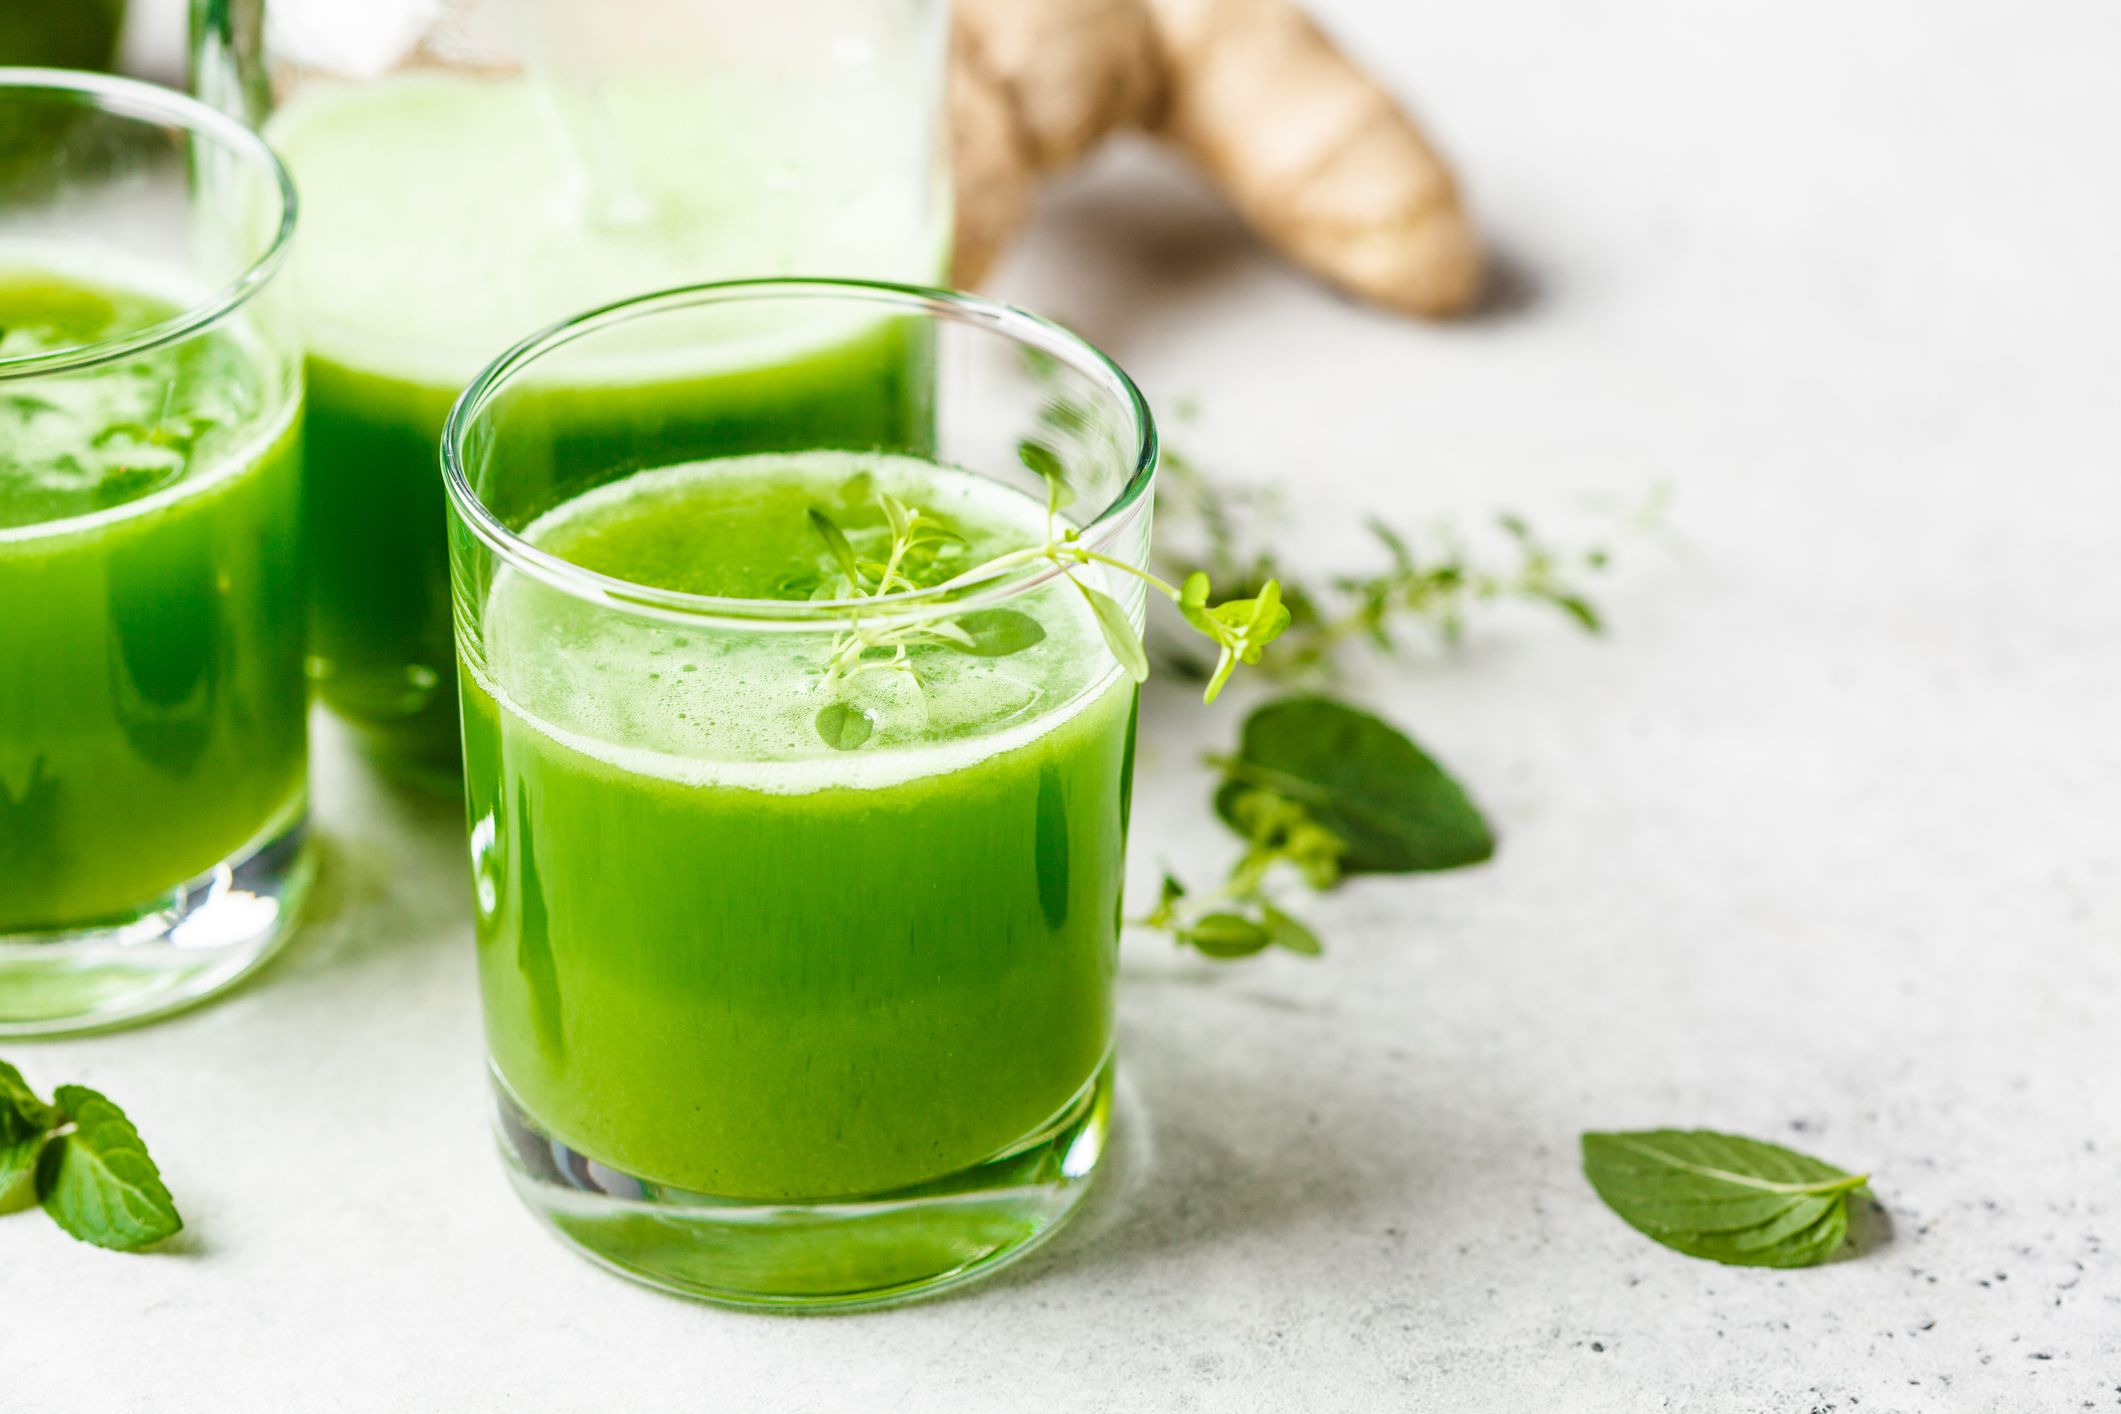 10 Healthy Green Juice Recipes That Actually Taste Great image